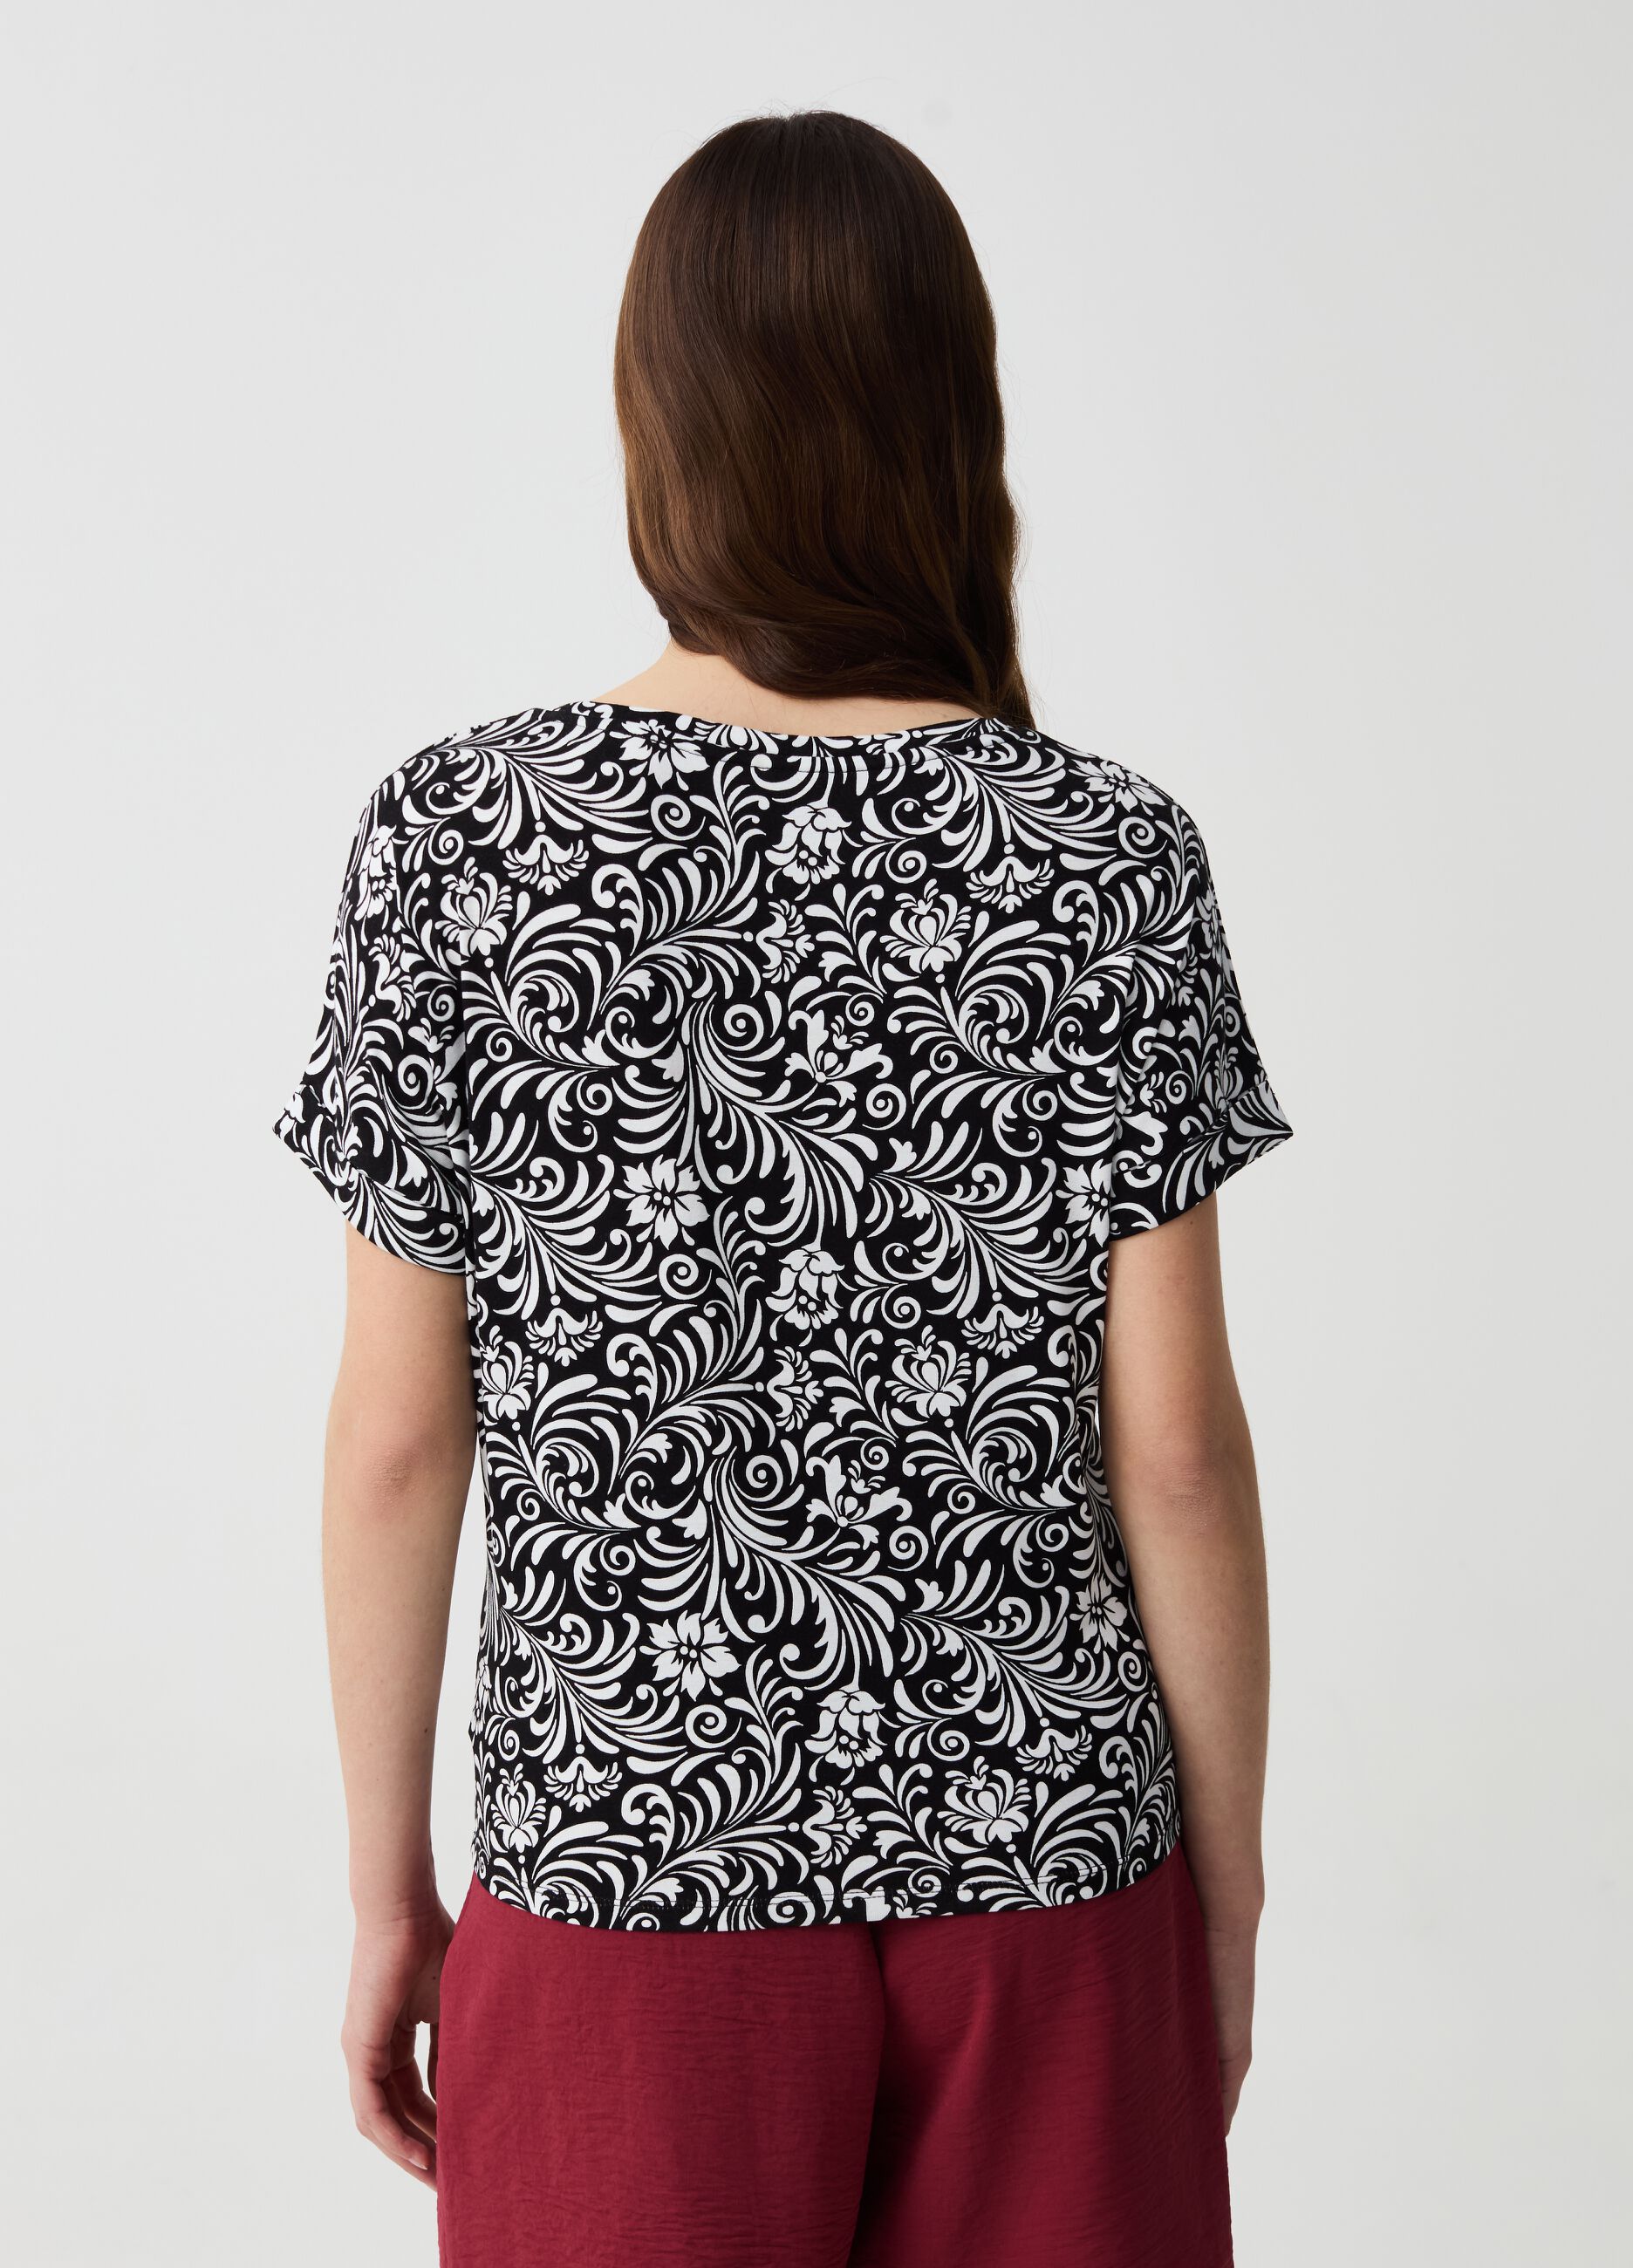 Floral T-shirt with kimono sleeves